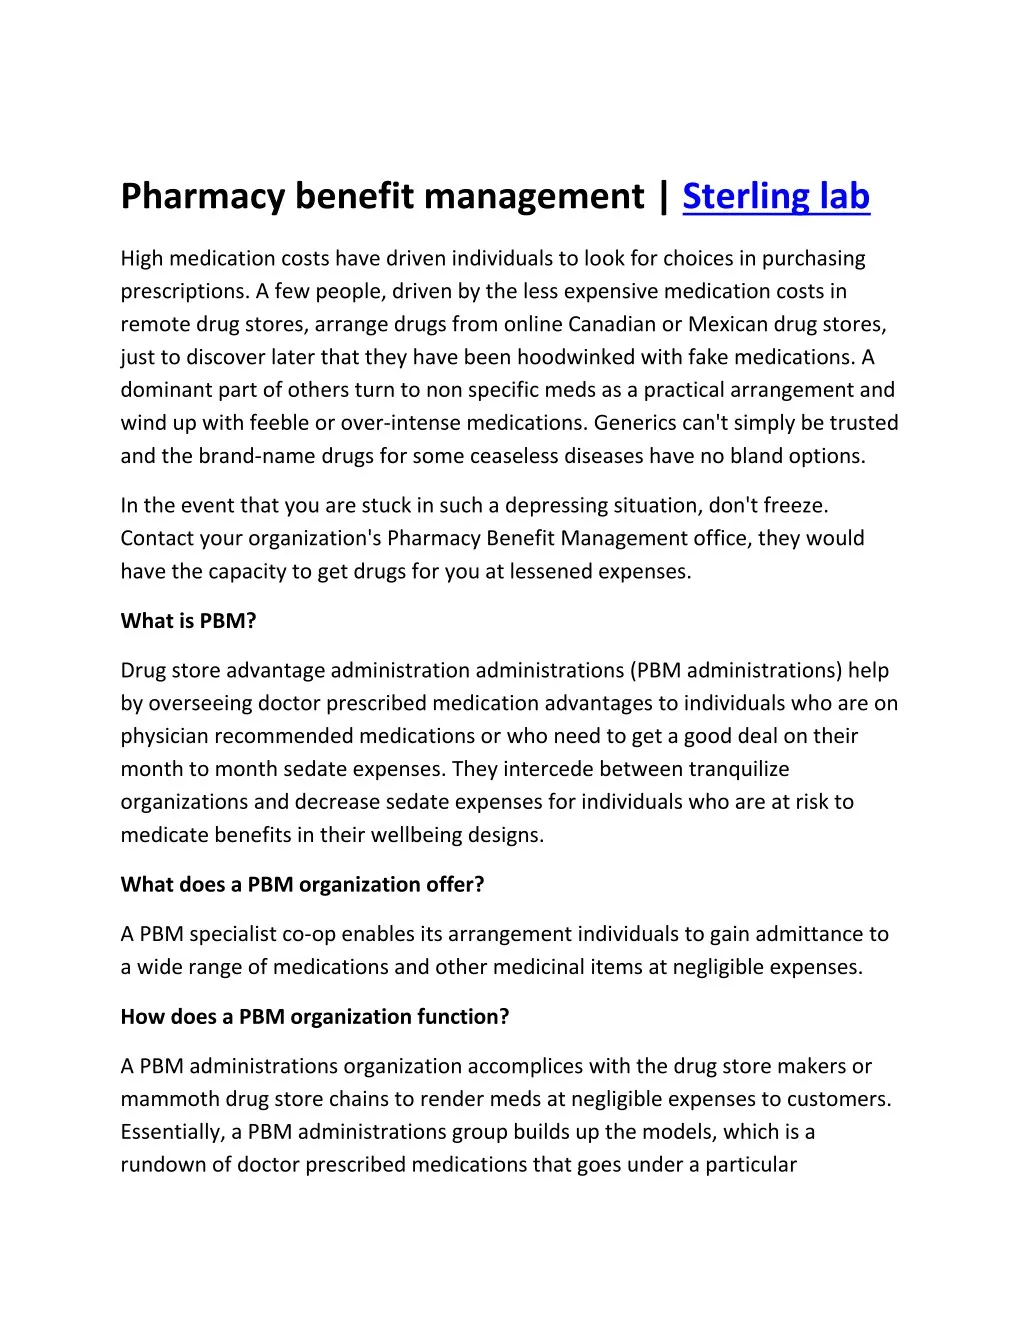 pharmacy benefit management sterling lab